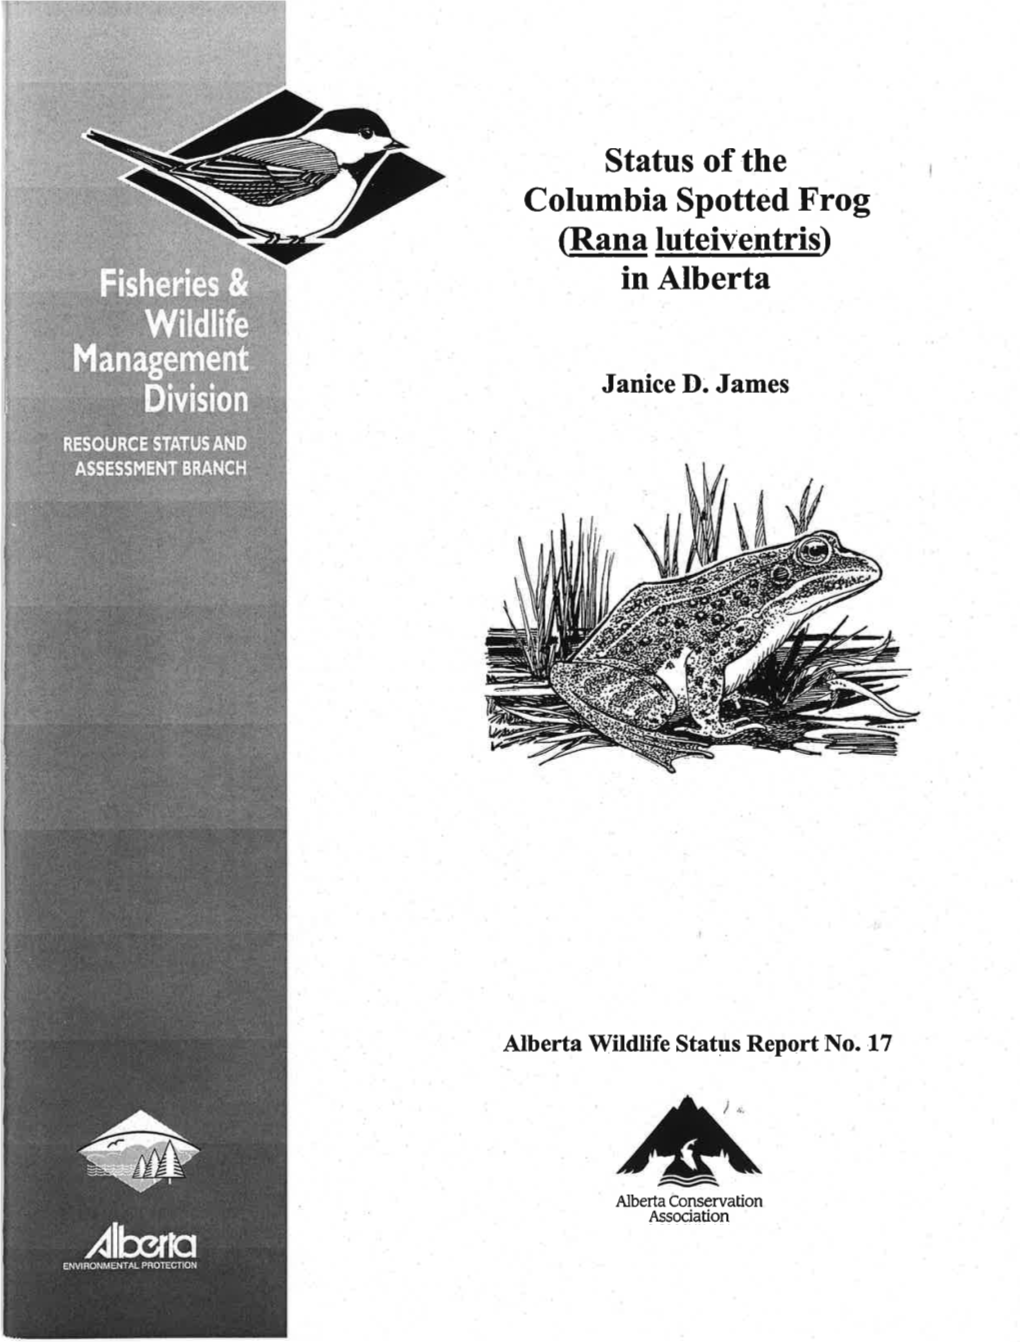 Status of Columbia Spotted Frog in Alberta 1998